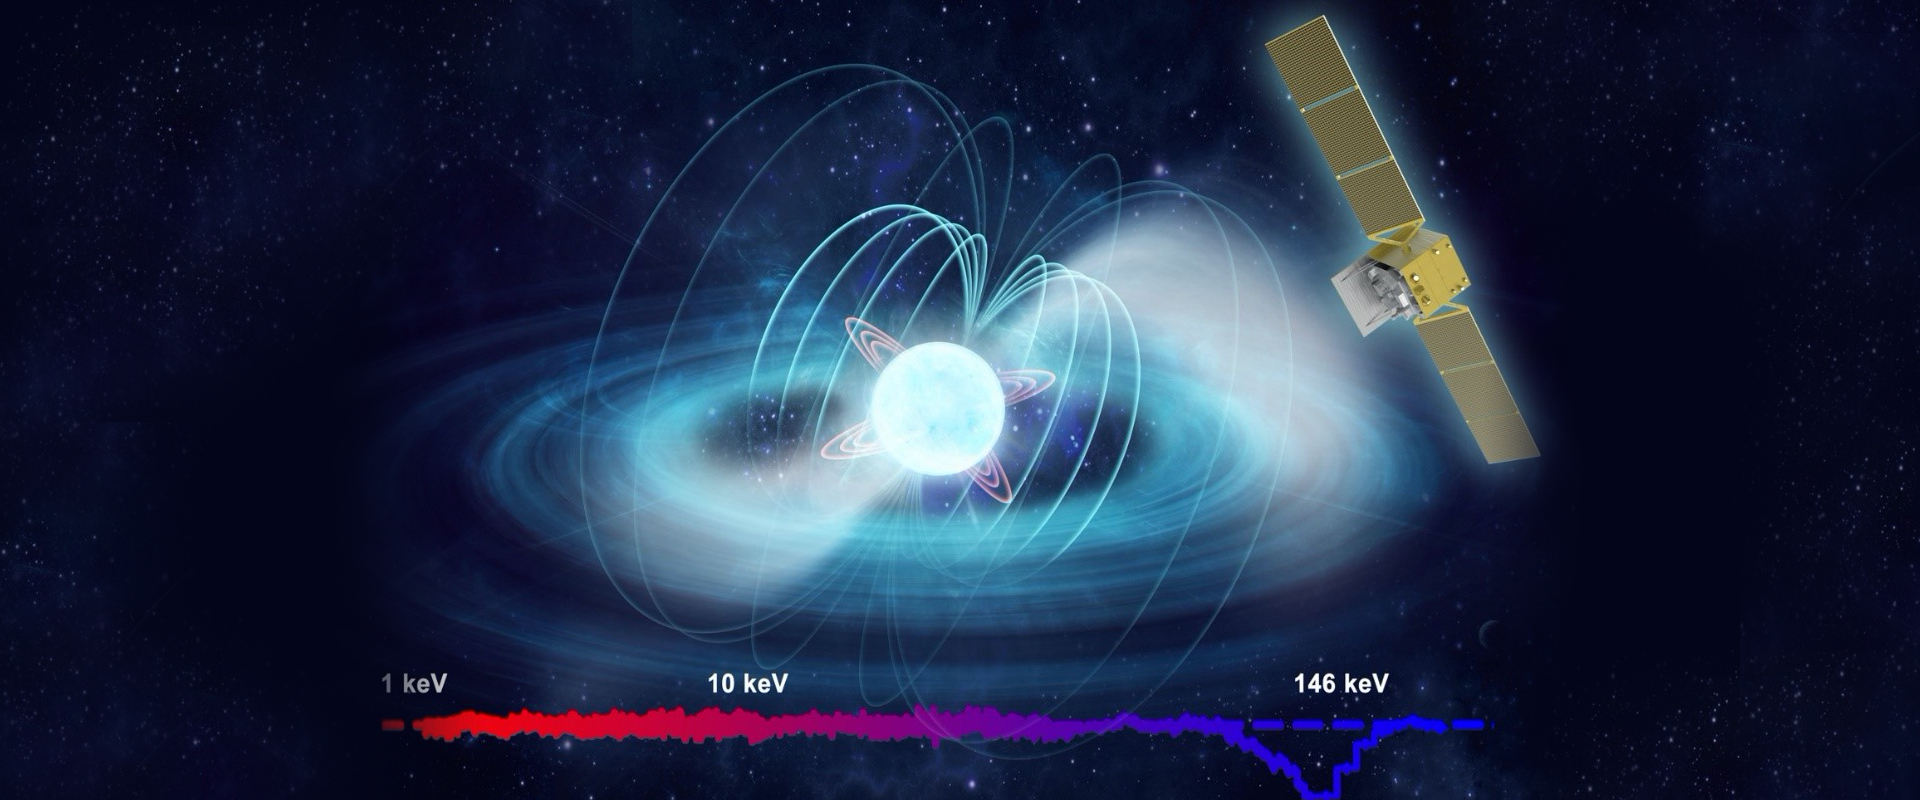 Insight-HXMT Breaks Own Measurement Record for Strongest Magnetic Field in Universe